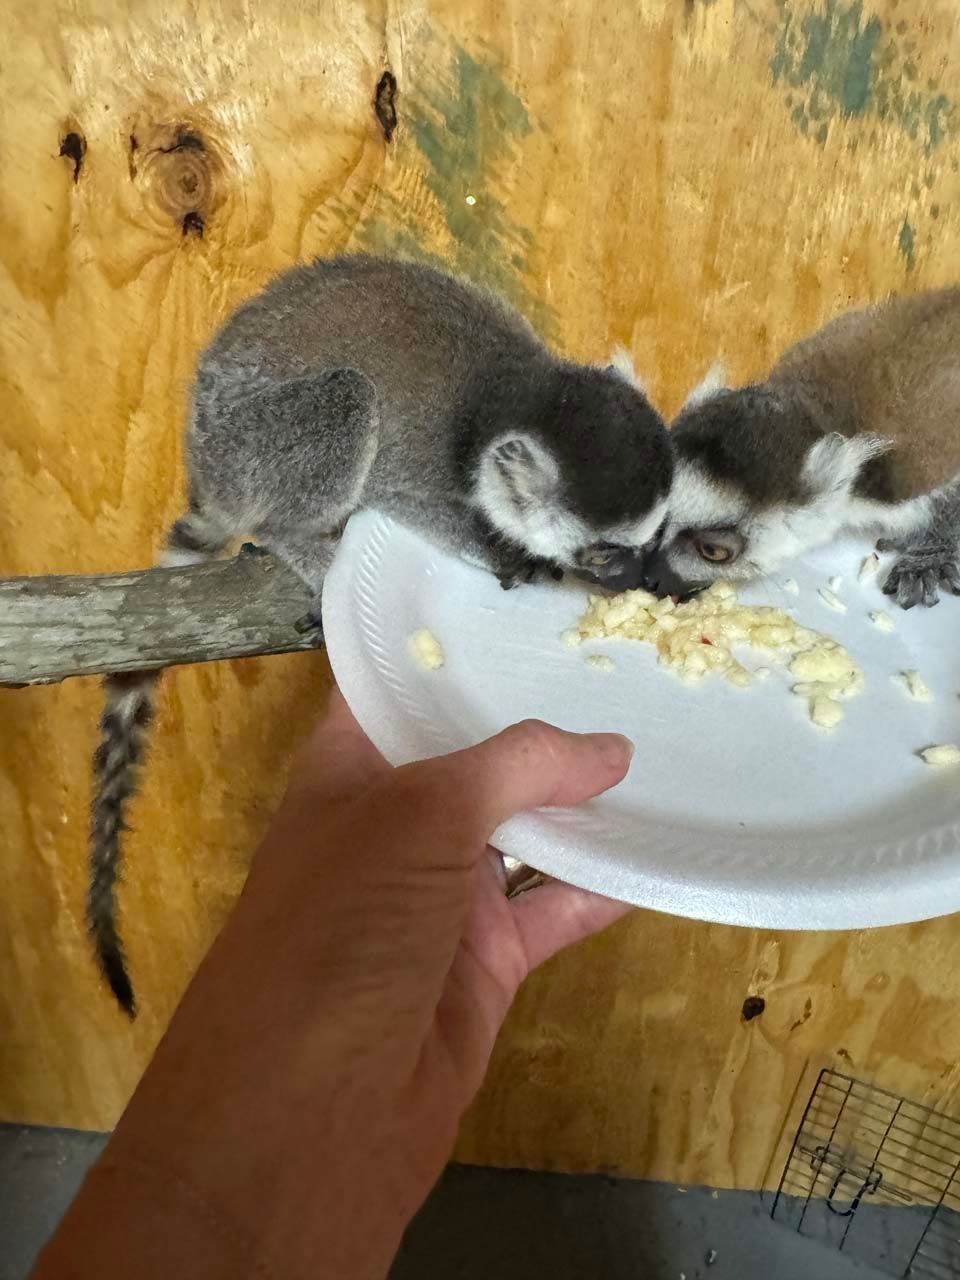 A person is feeding a lemur from a paper plate